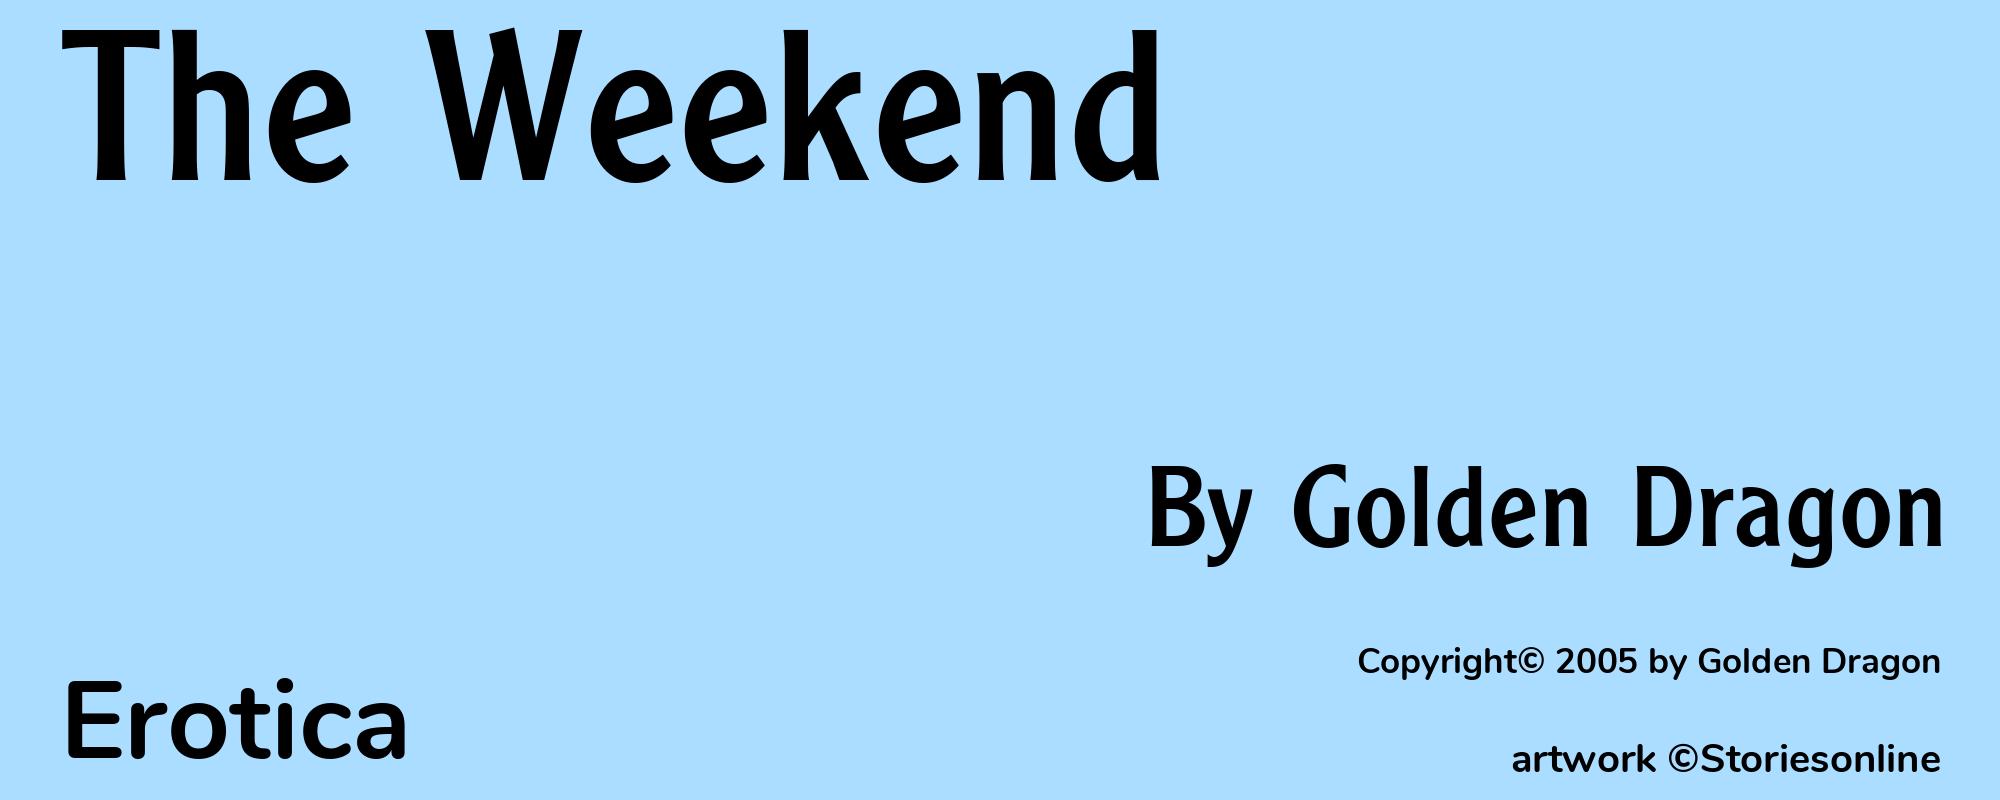 The Weekend - Cover